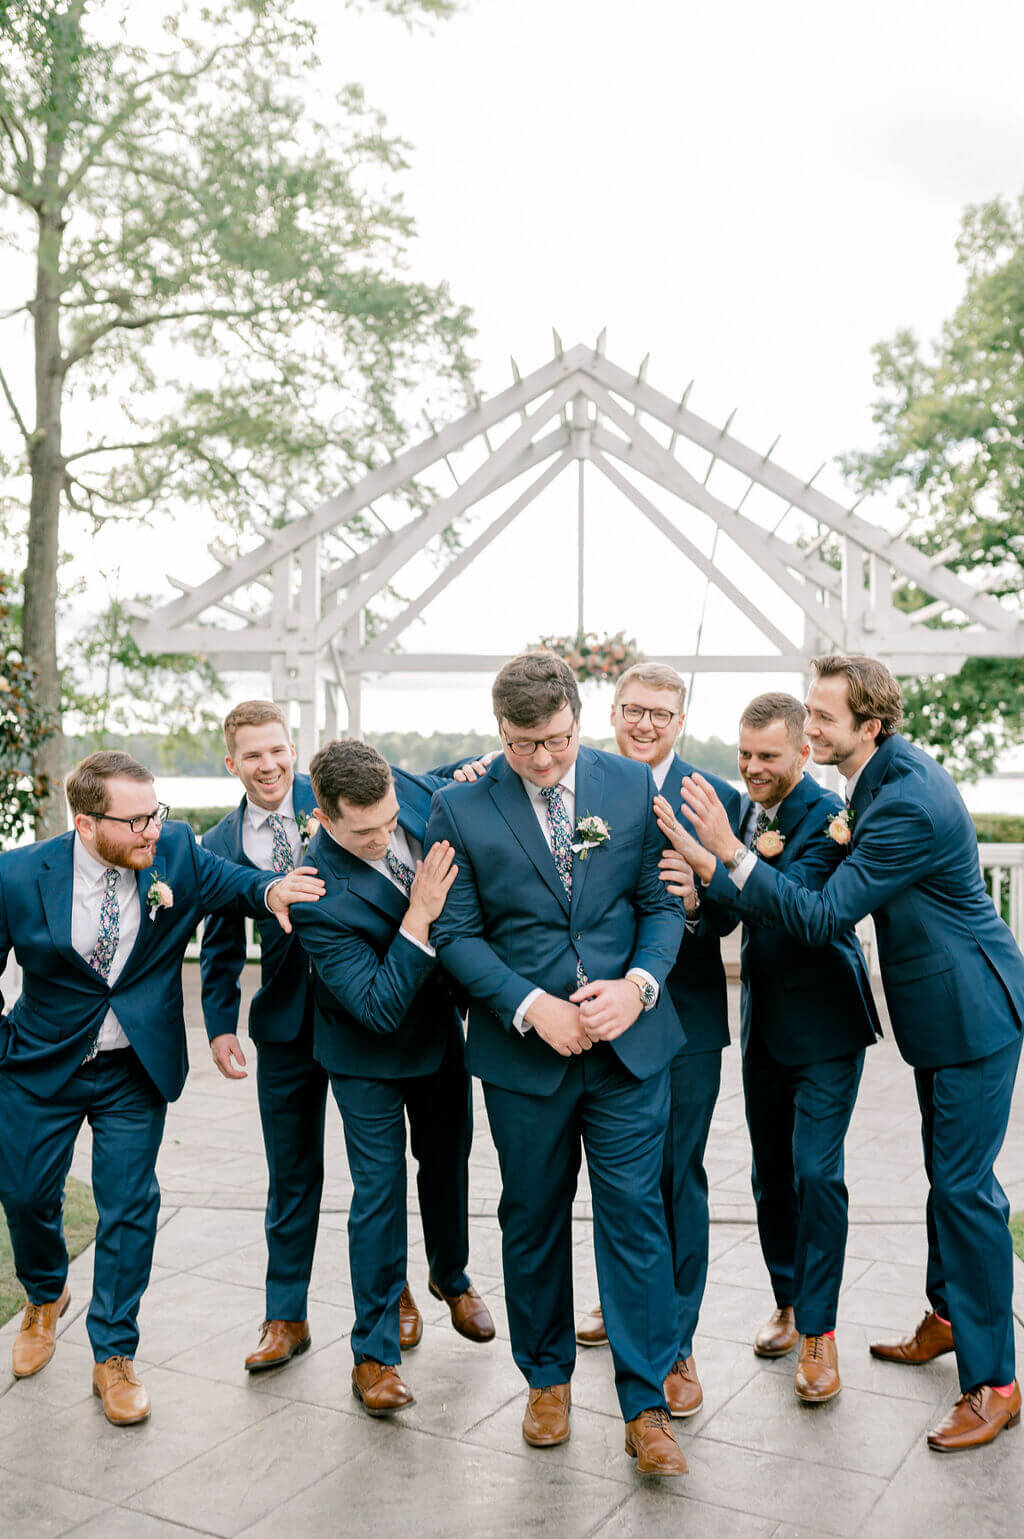 Groom and his groomsmen messing around with one another during groomsmen portraits